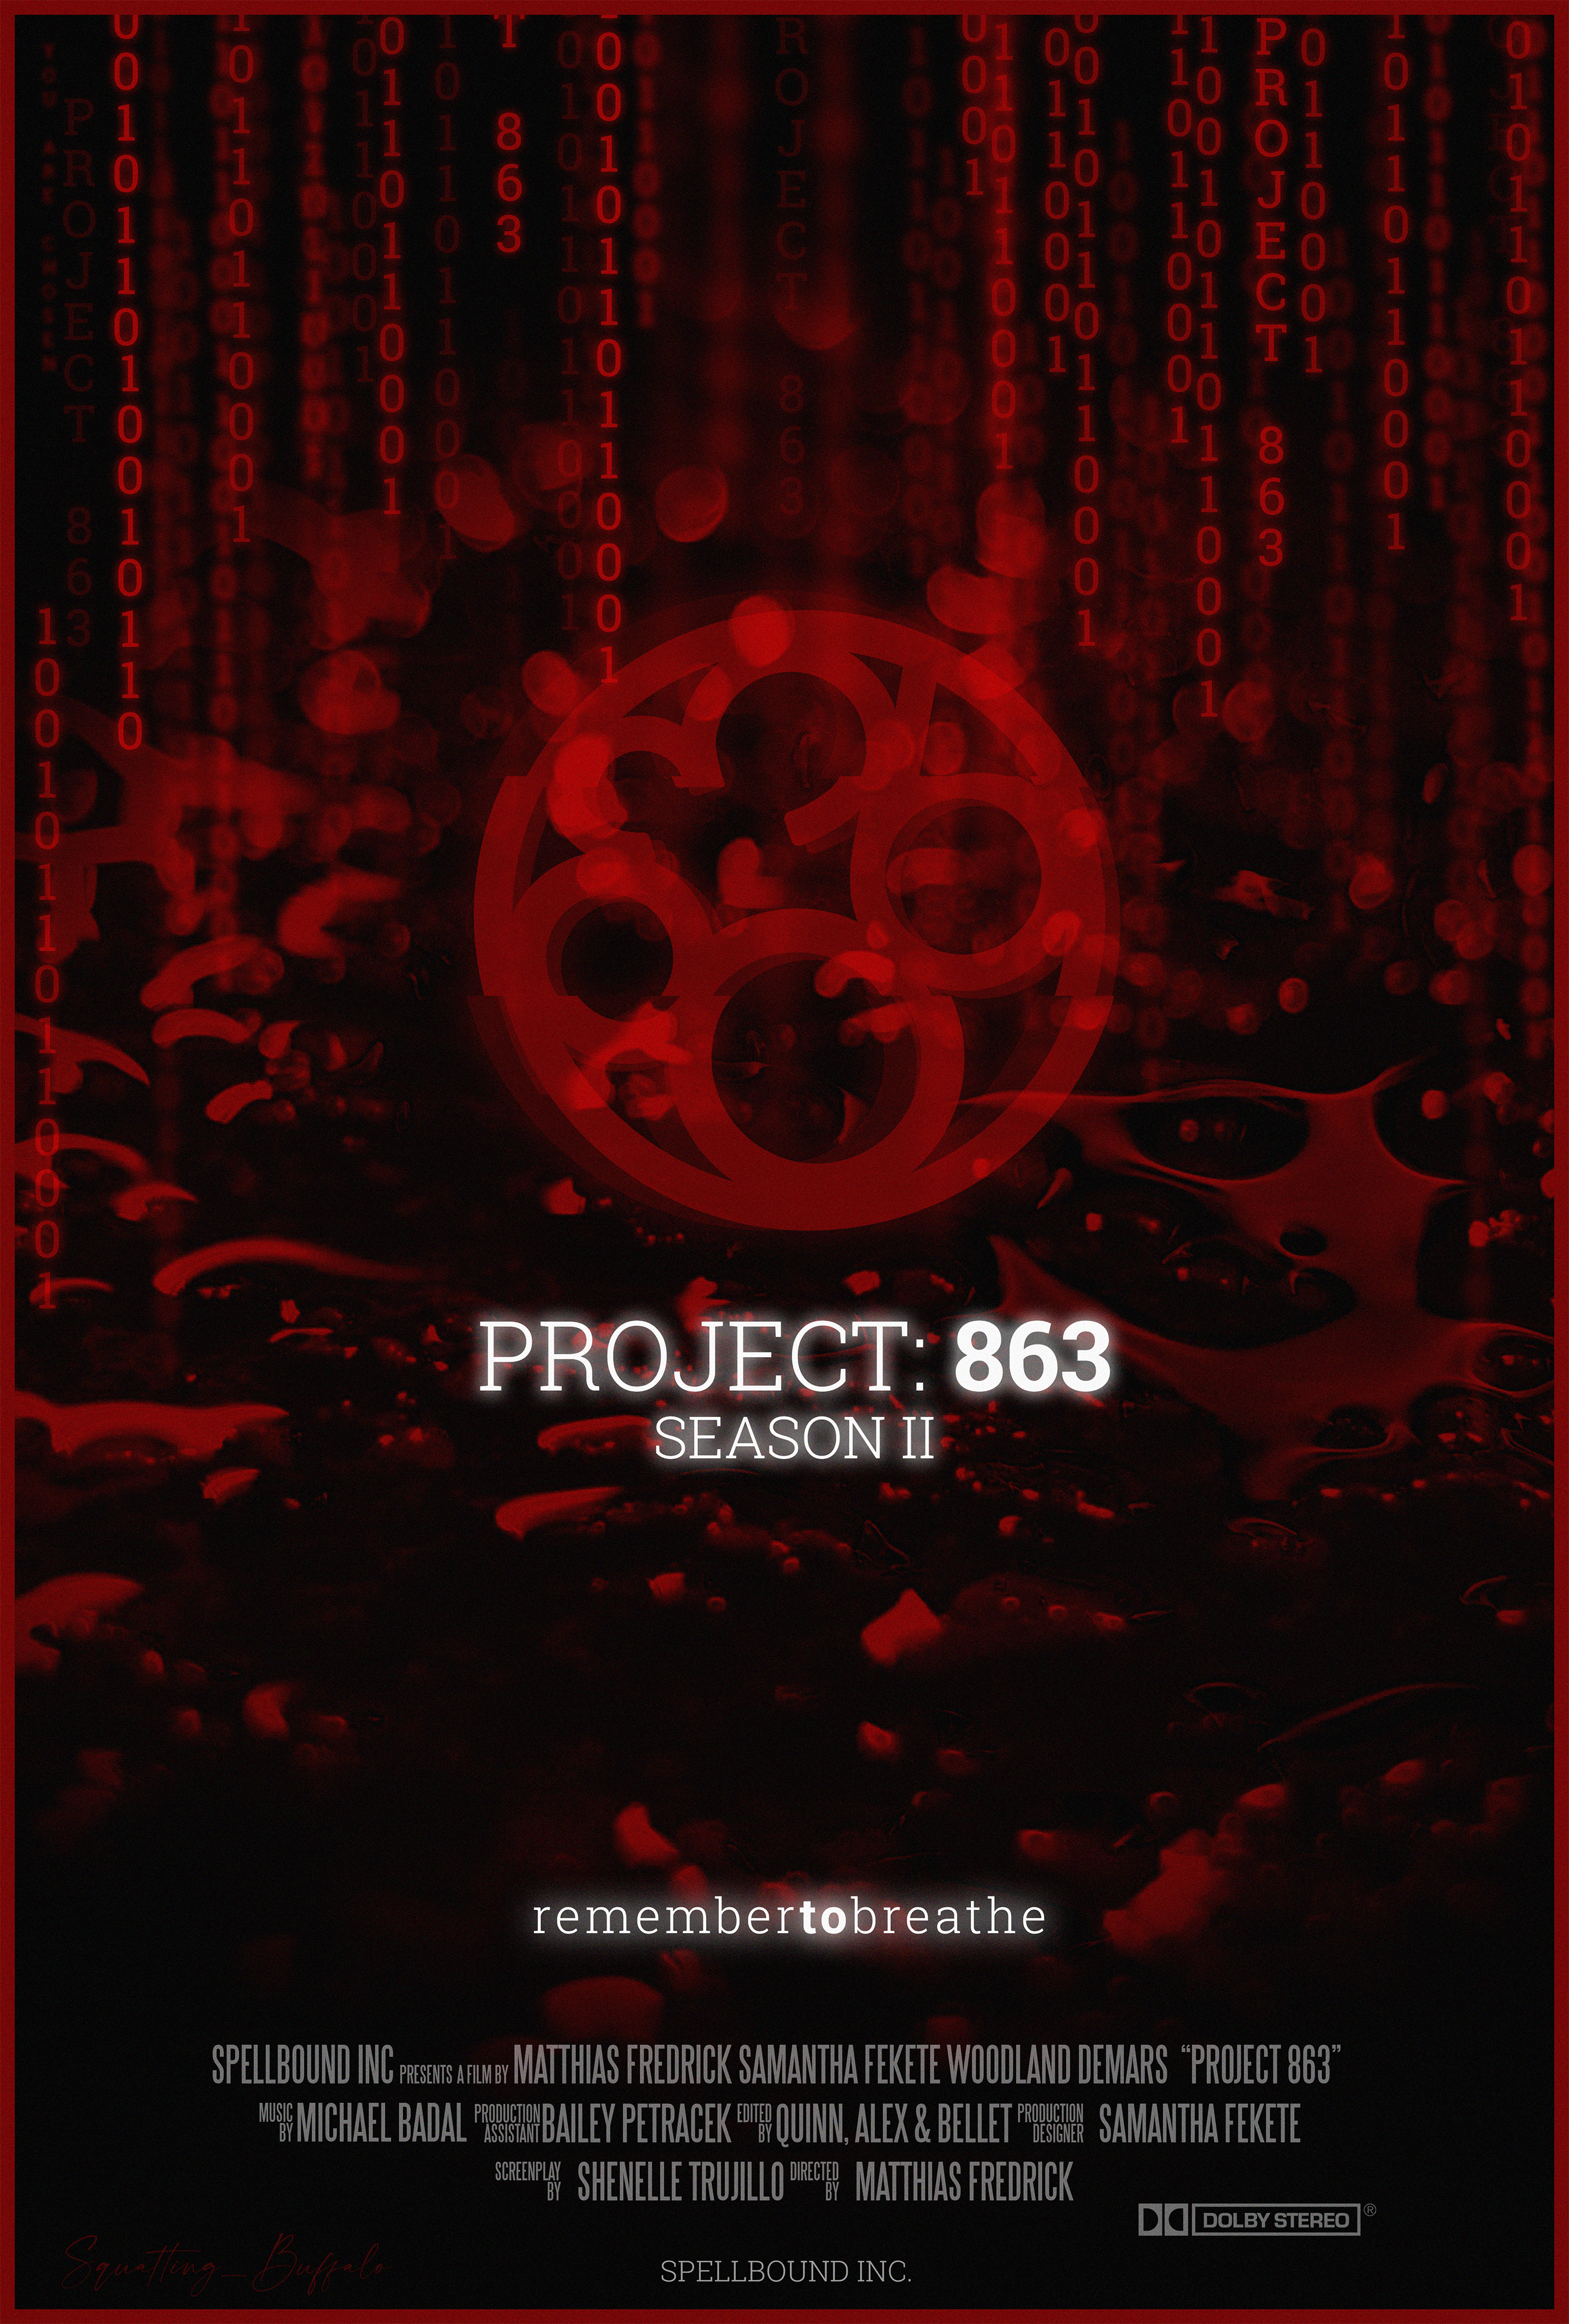 here is some 863 wallpaper take it or leave it lol i got bored   rMatthiasSubmissions